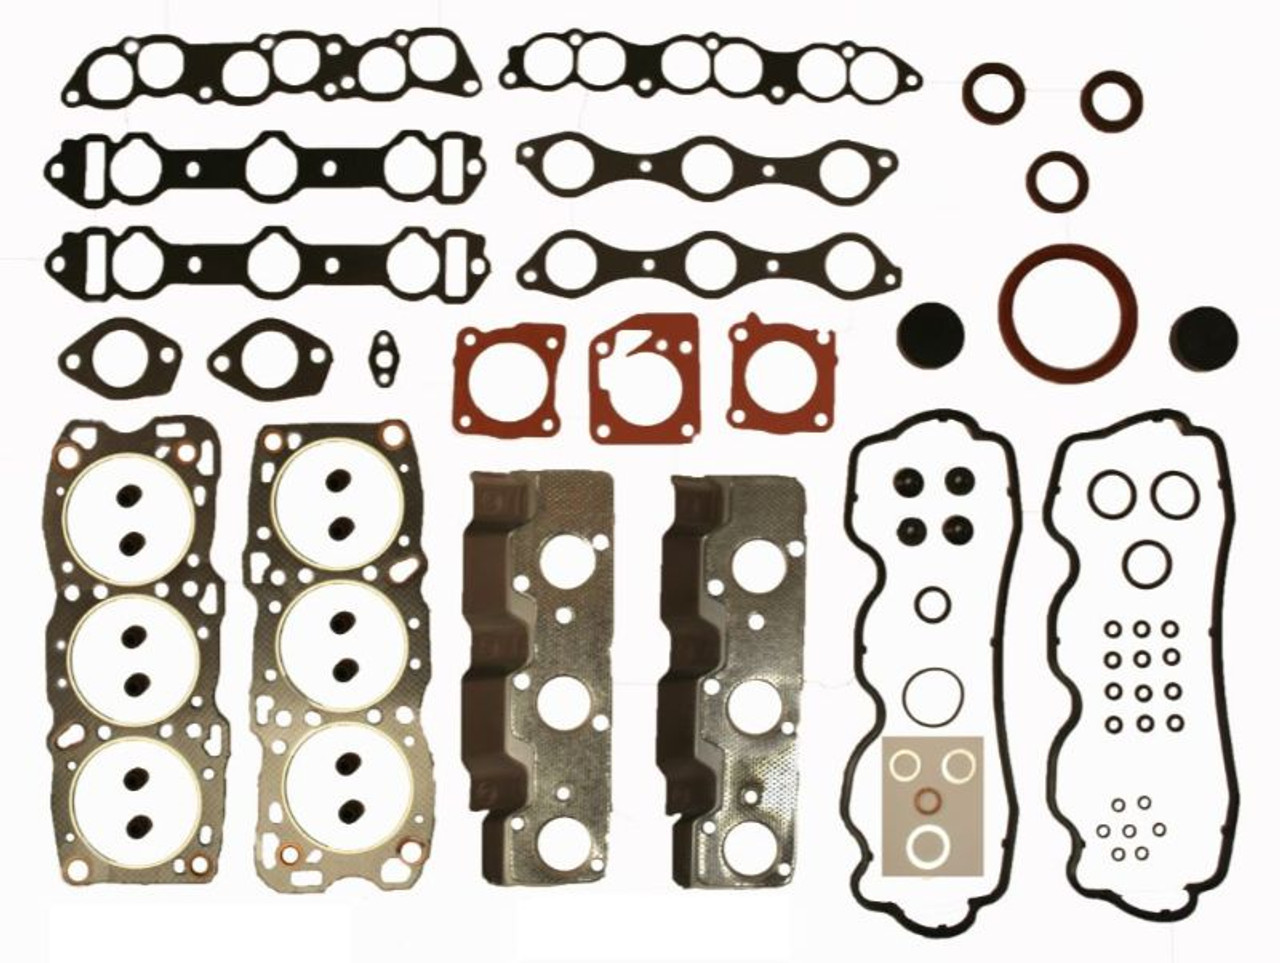 1998 Plymouth Grand Voyager 3.0L Engine Gasket Set CR3.0-49 -91